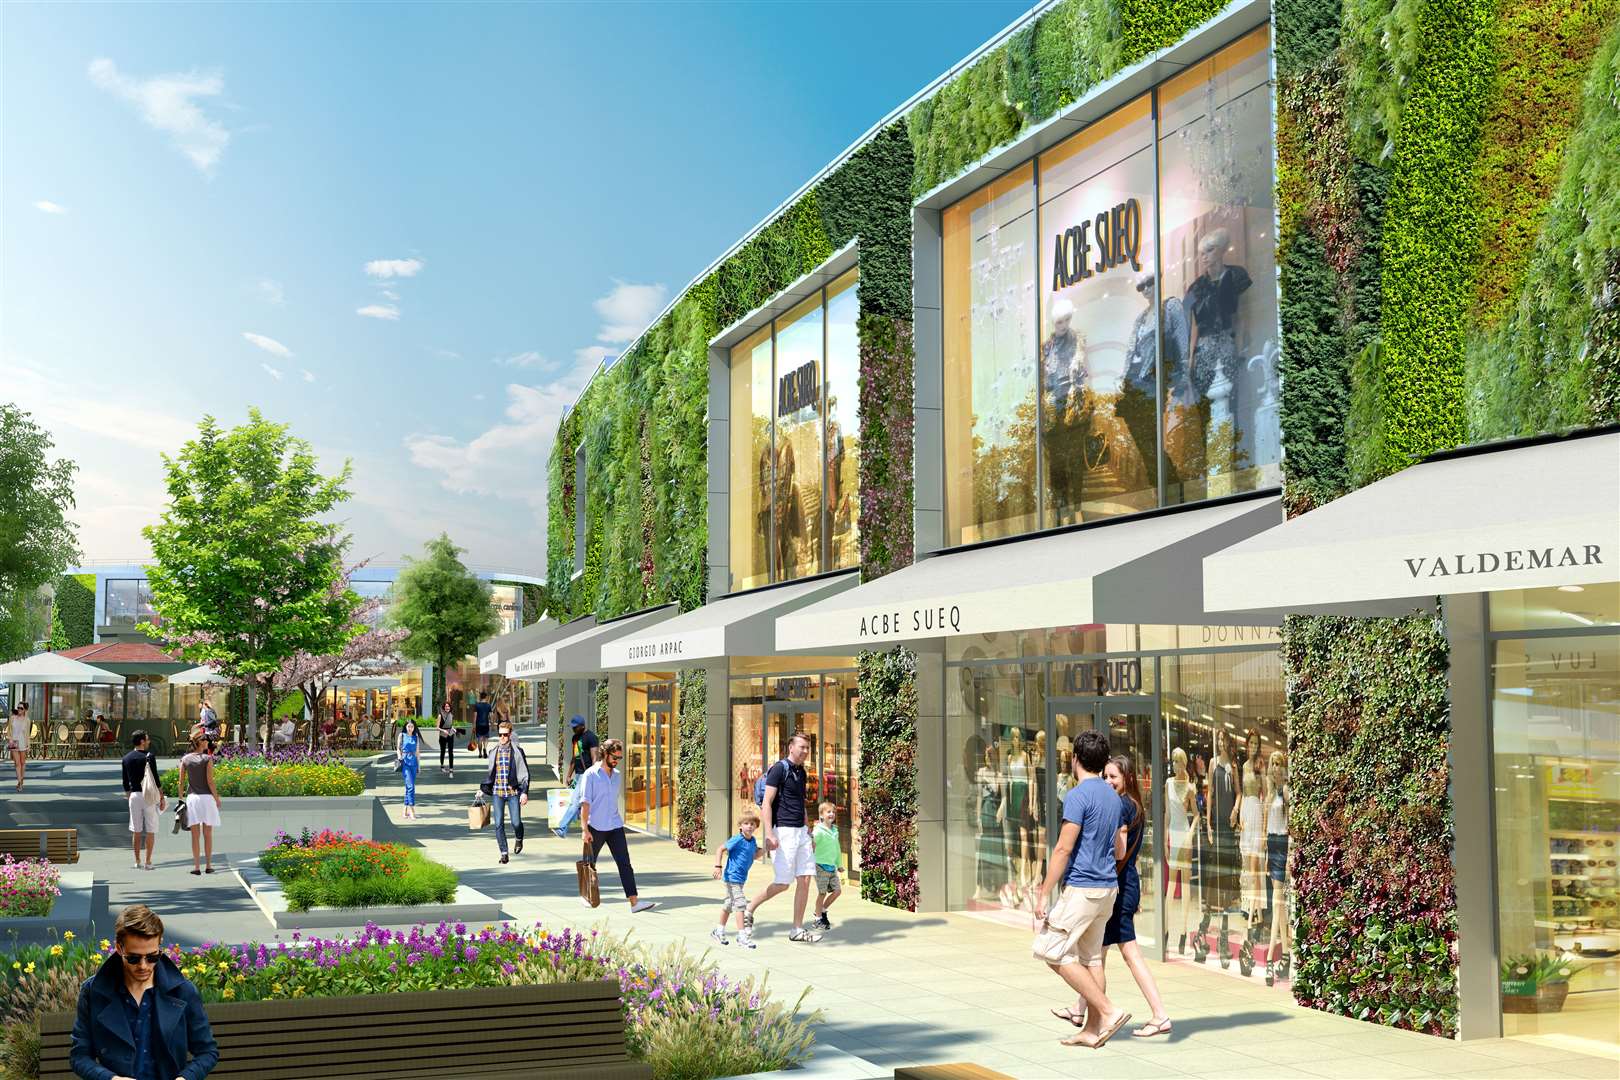 The Designer Outlet extension is set to be completed this autumn